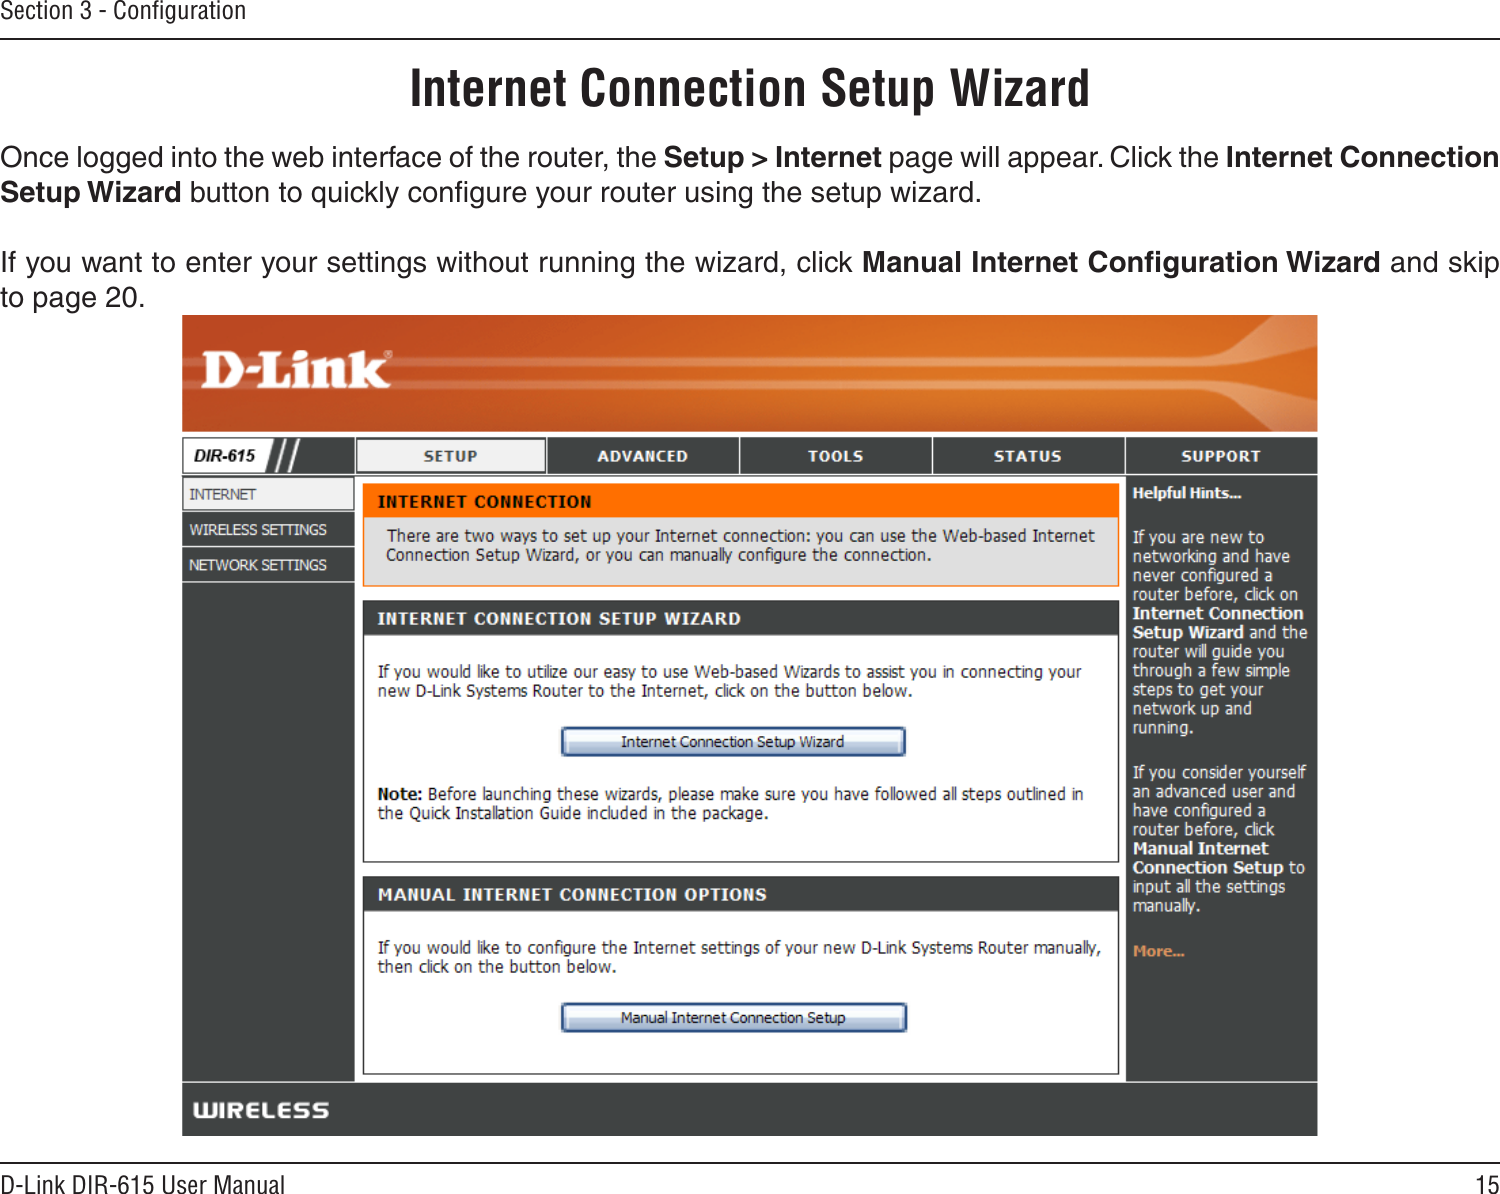 15D-Link DIR-615 User ManualSection 3 - ConﬁgurationInternet Connection Setup WizardOnce logged into the web interface of the router, the Setup &gt; Internet page will appear. Click the Internet Connection Setup Wizard button to quickly conﬁgure your router using the setup wizard.If you want to enter your settings without running the wizard, click Manual Internet Conﬁguration Wizard and skip to page 20.